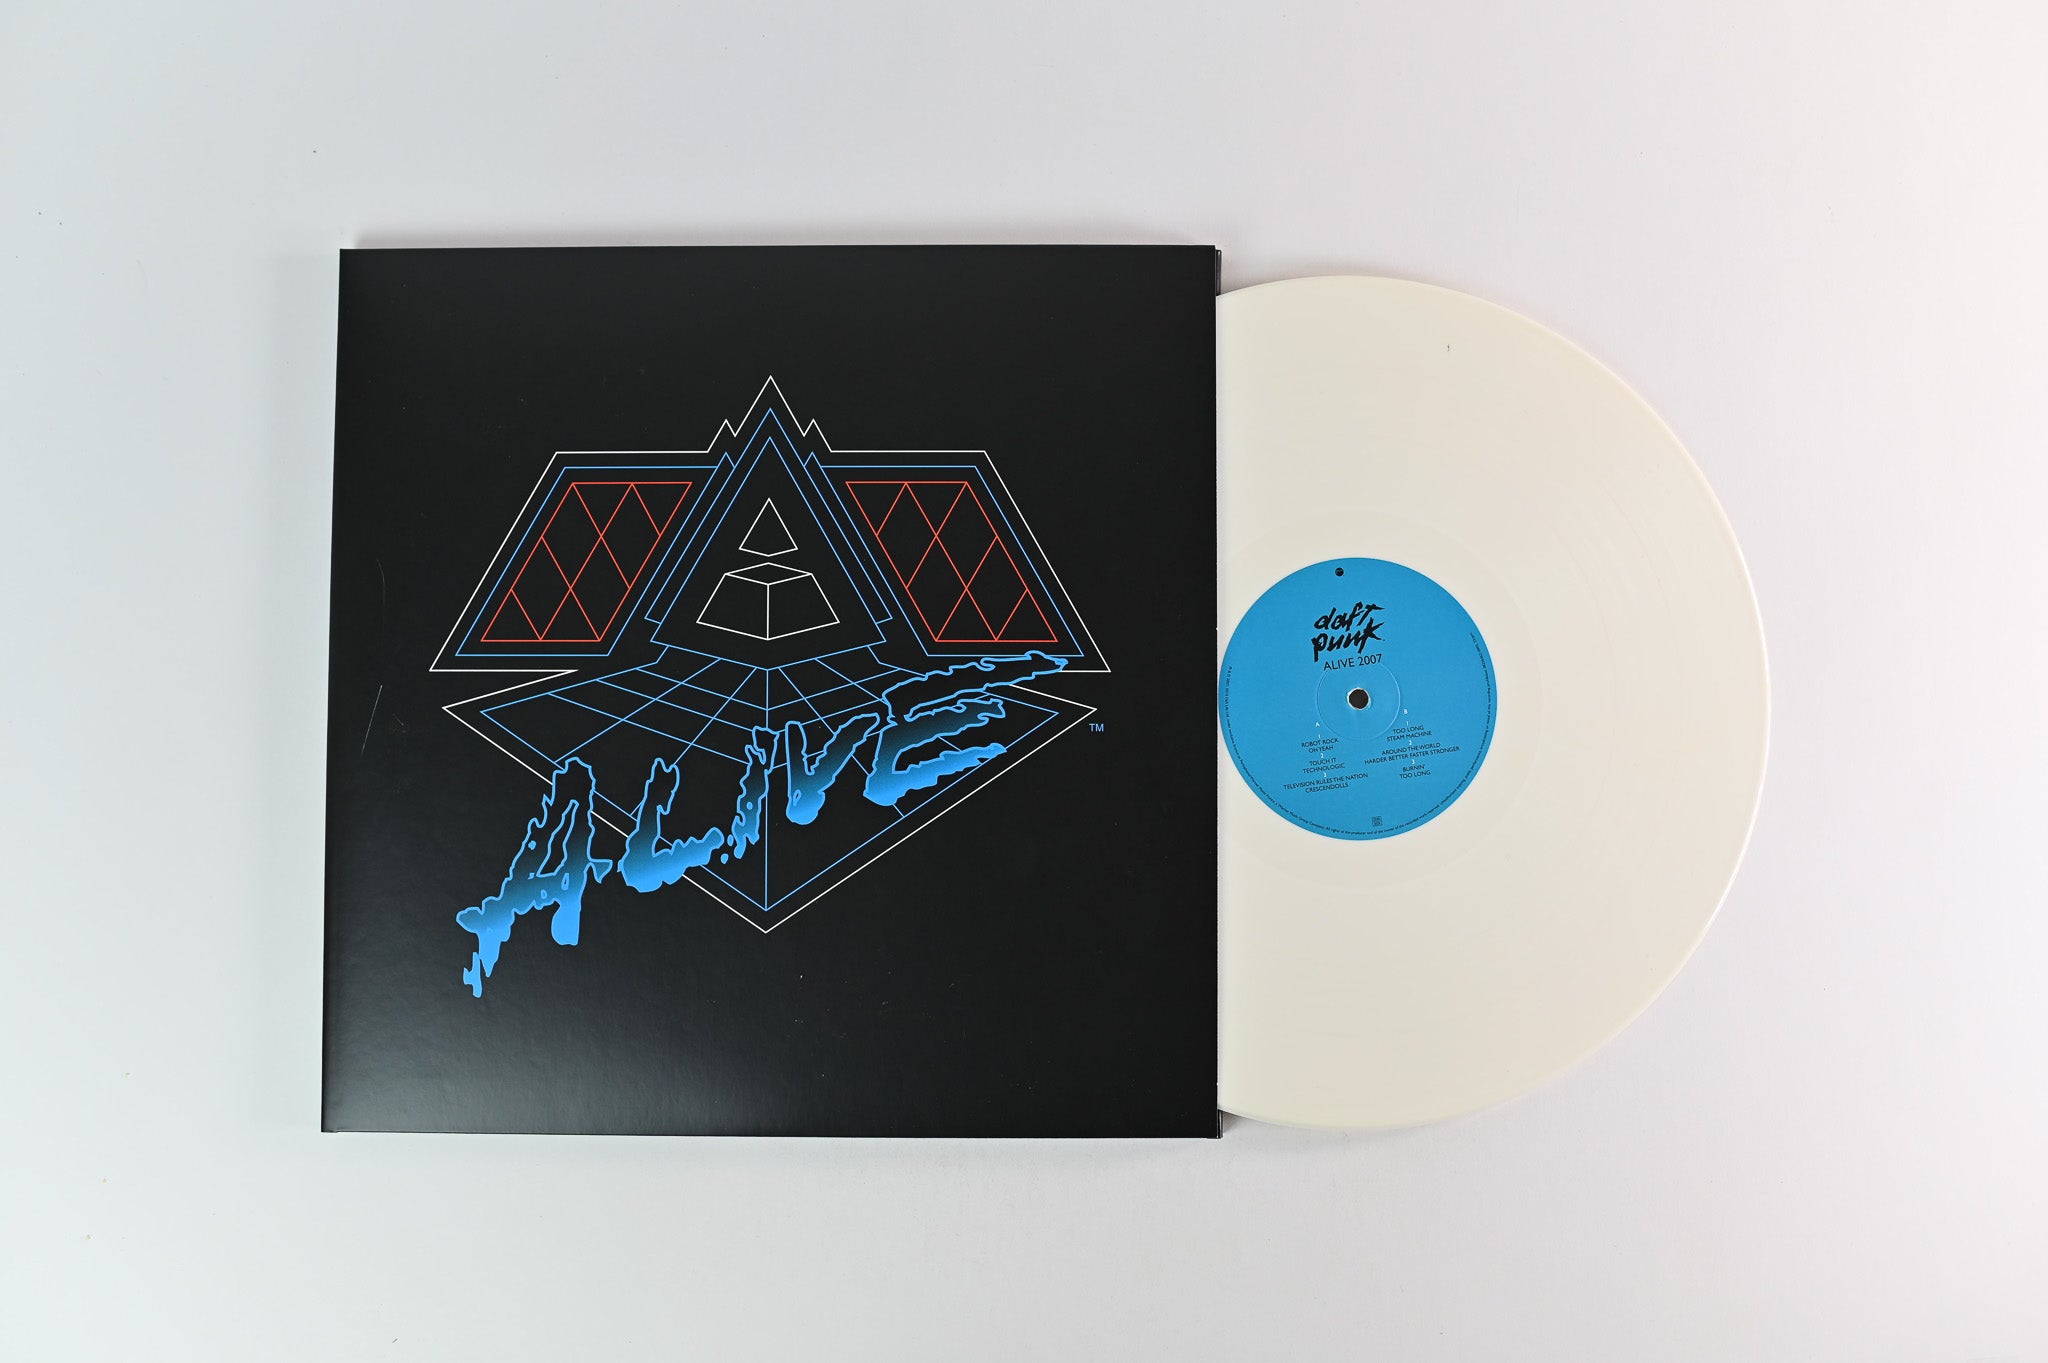 Daft Punk - Alive 1997 + Alive 2007 on Atlantic Limited Deluxe Edition Box Set